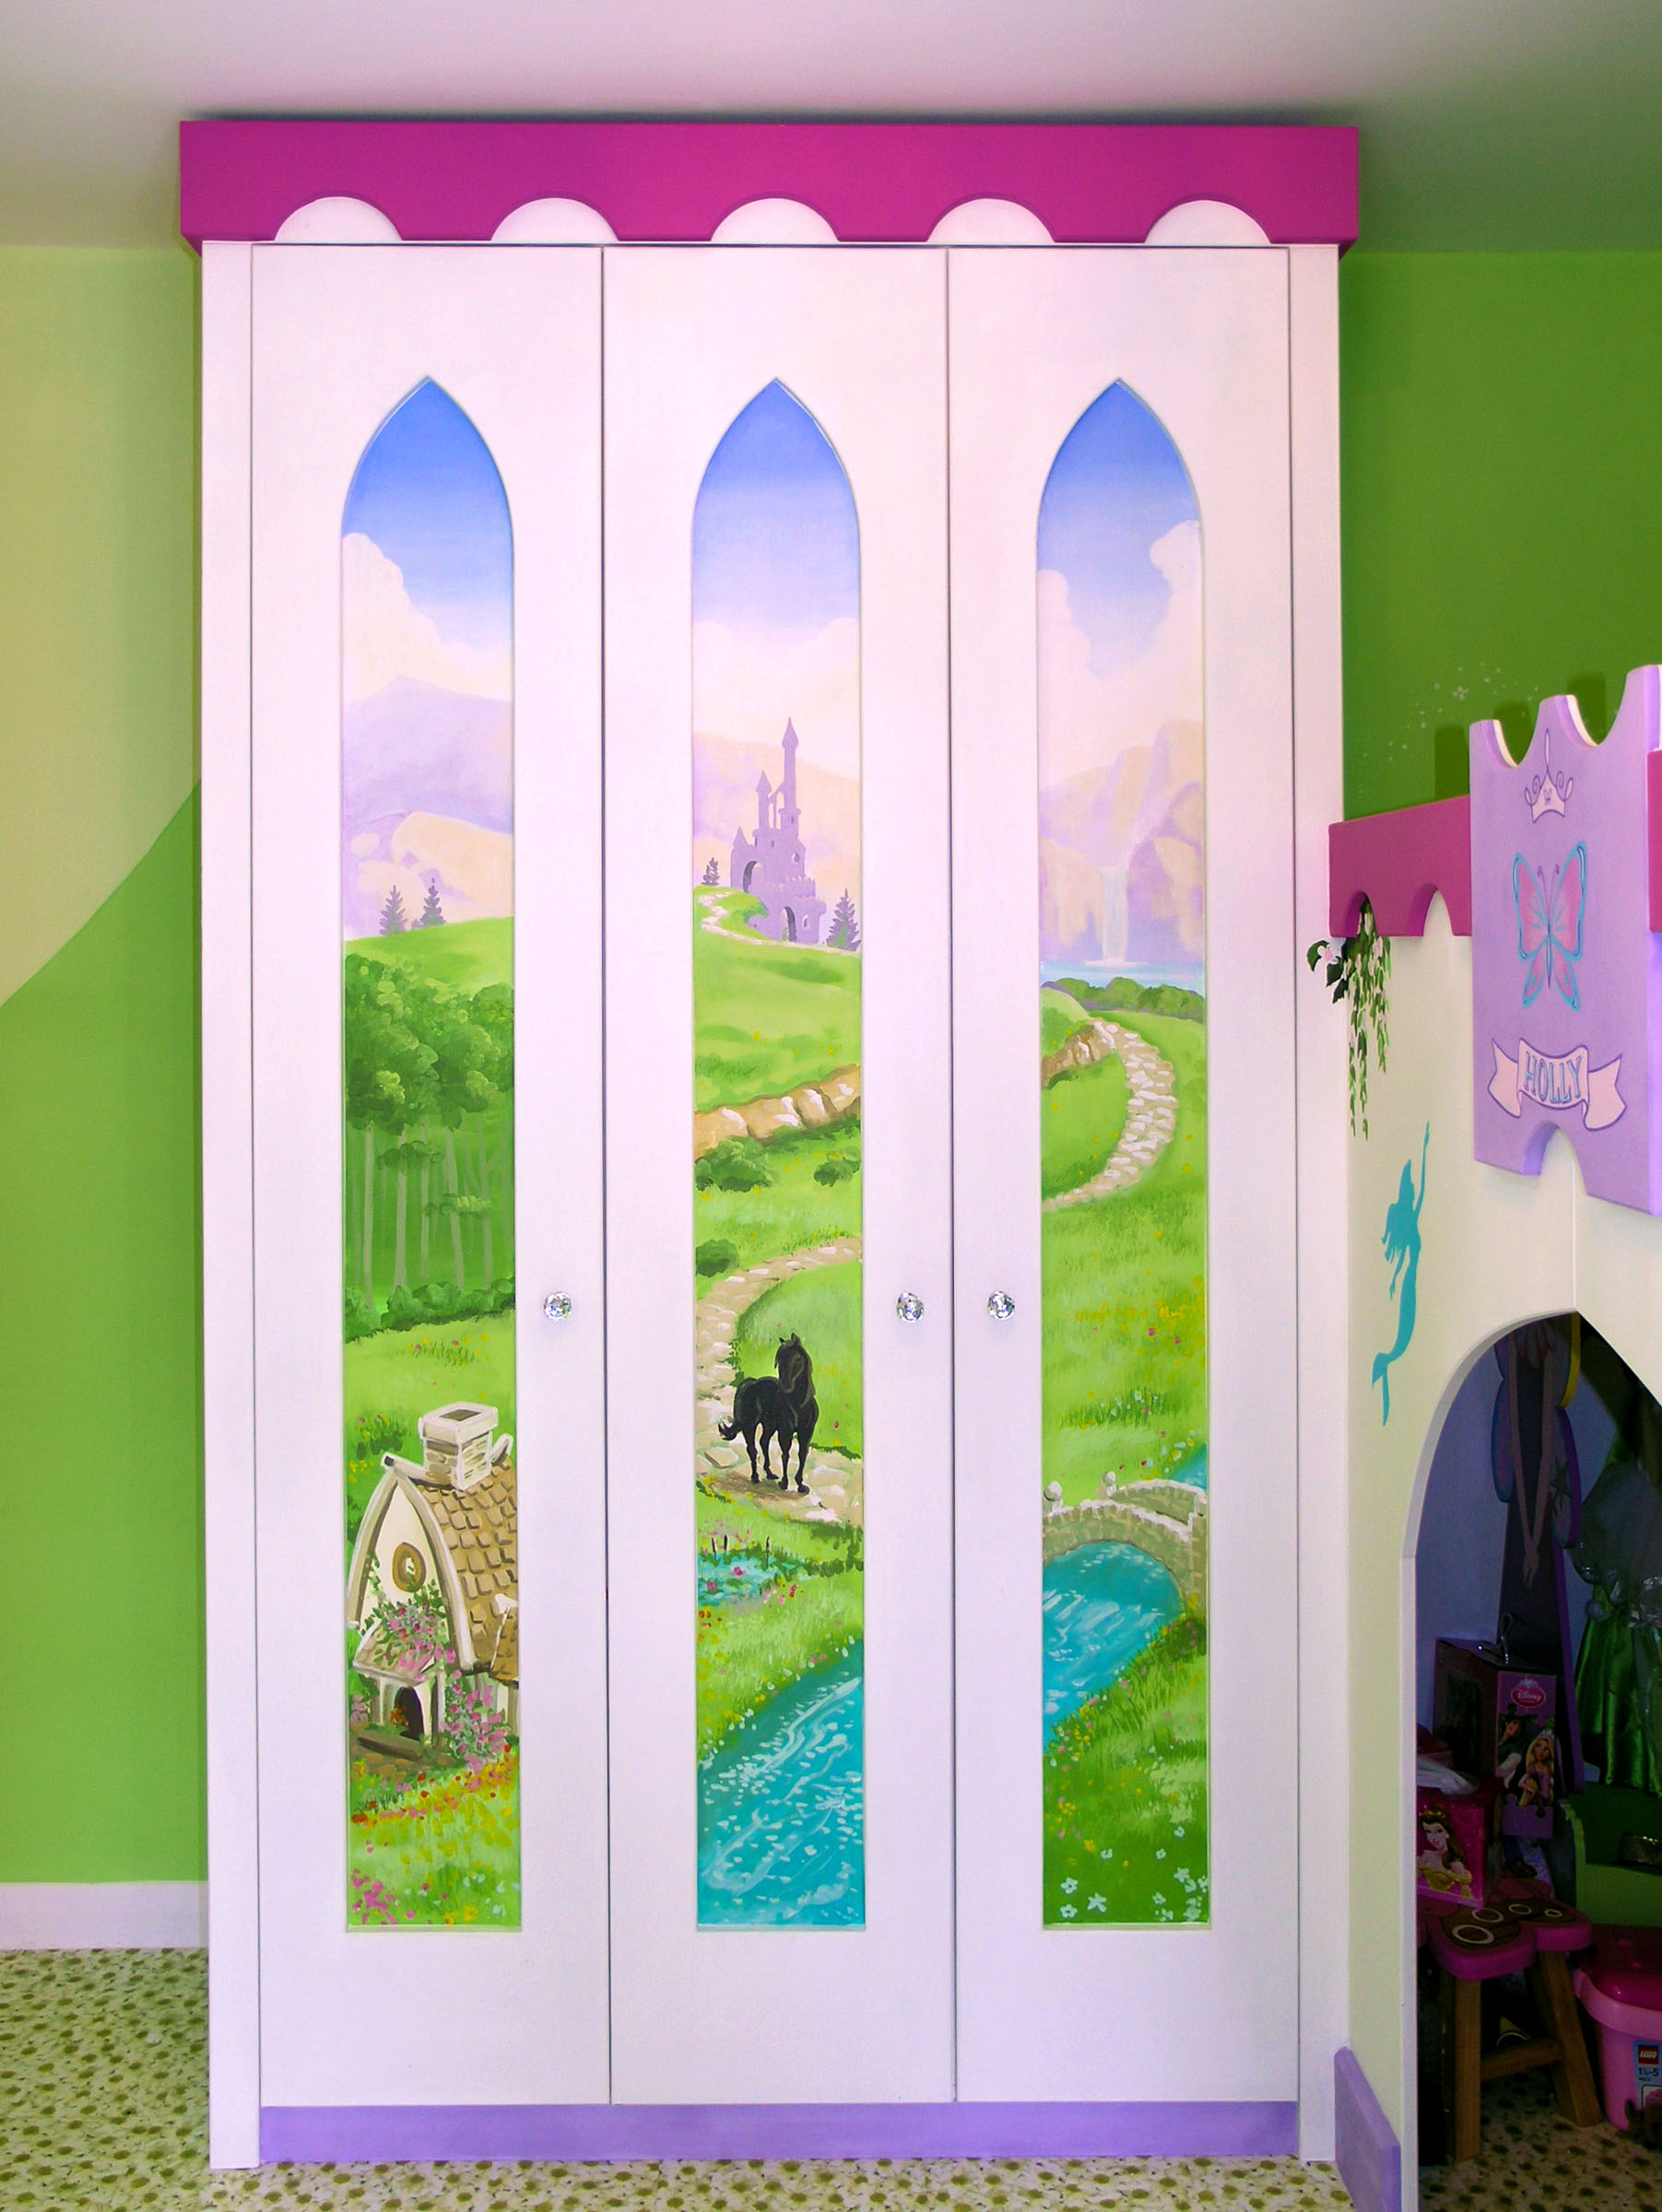 Painted wardrobe with fantasy kingdom seen through arched "windows"